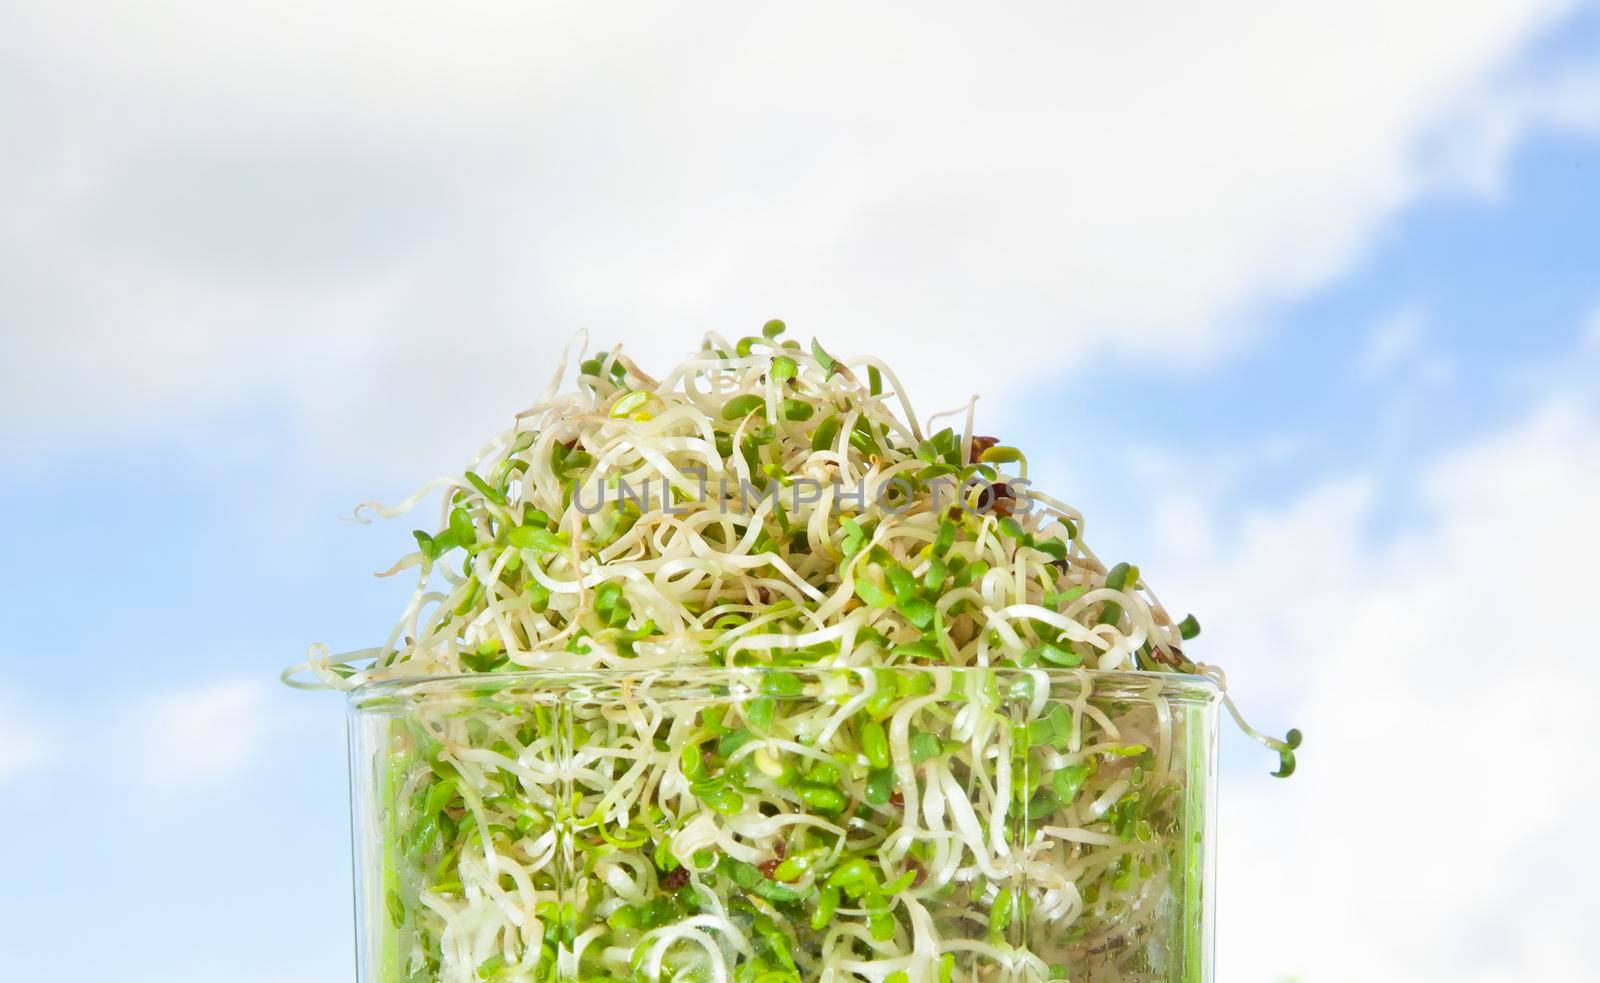 Macrobiotic food. Mix of fresh sprouts in glass jar. Alfalfa Sprouted Seeds by SlayCer